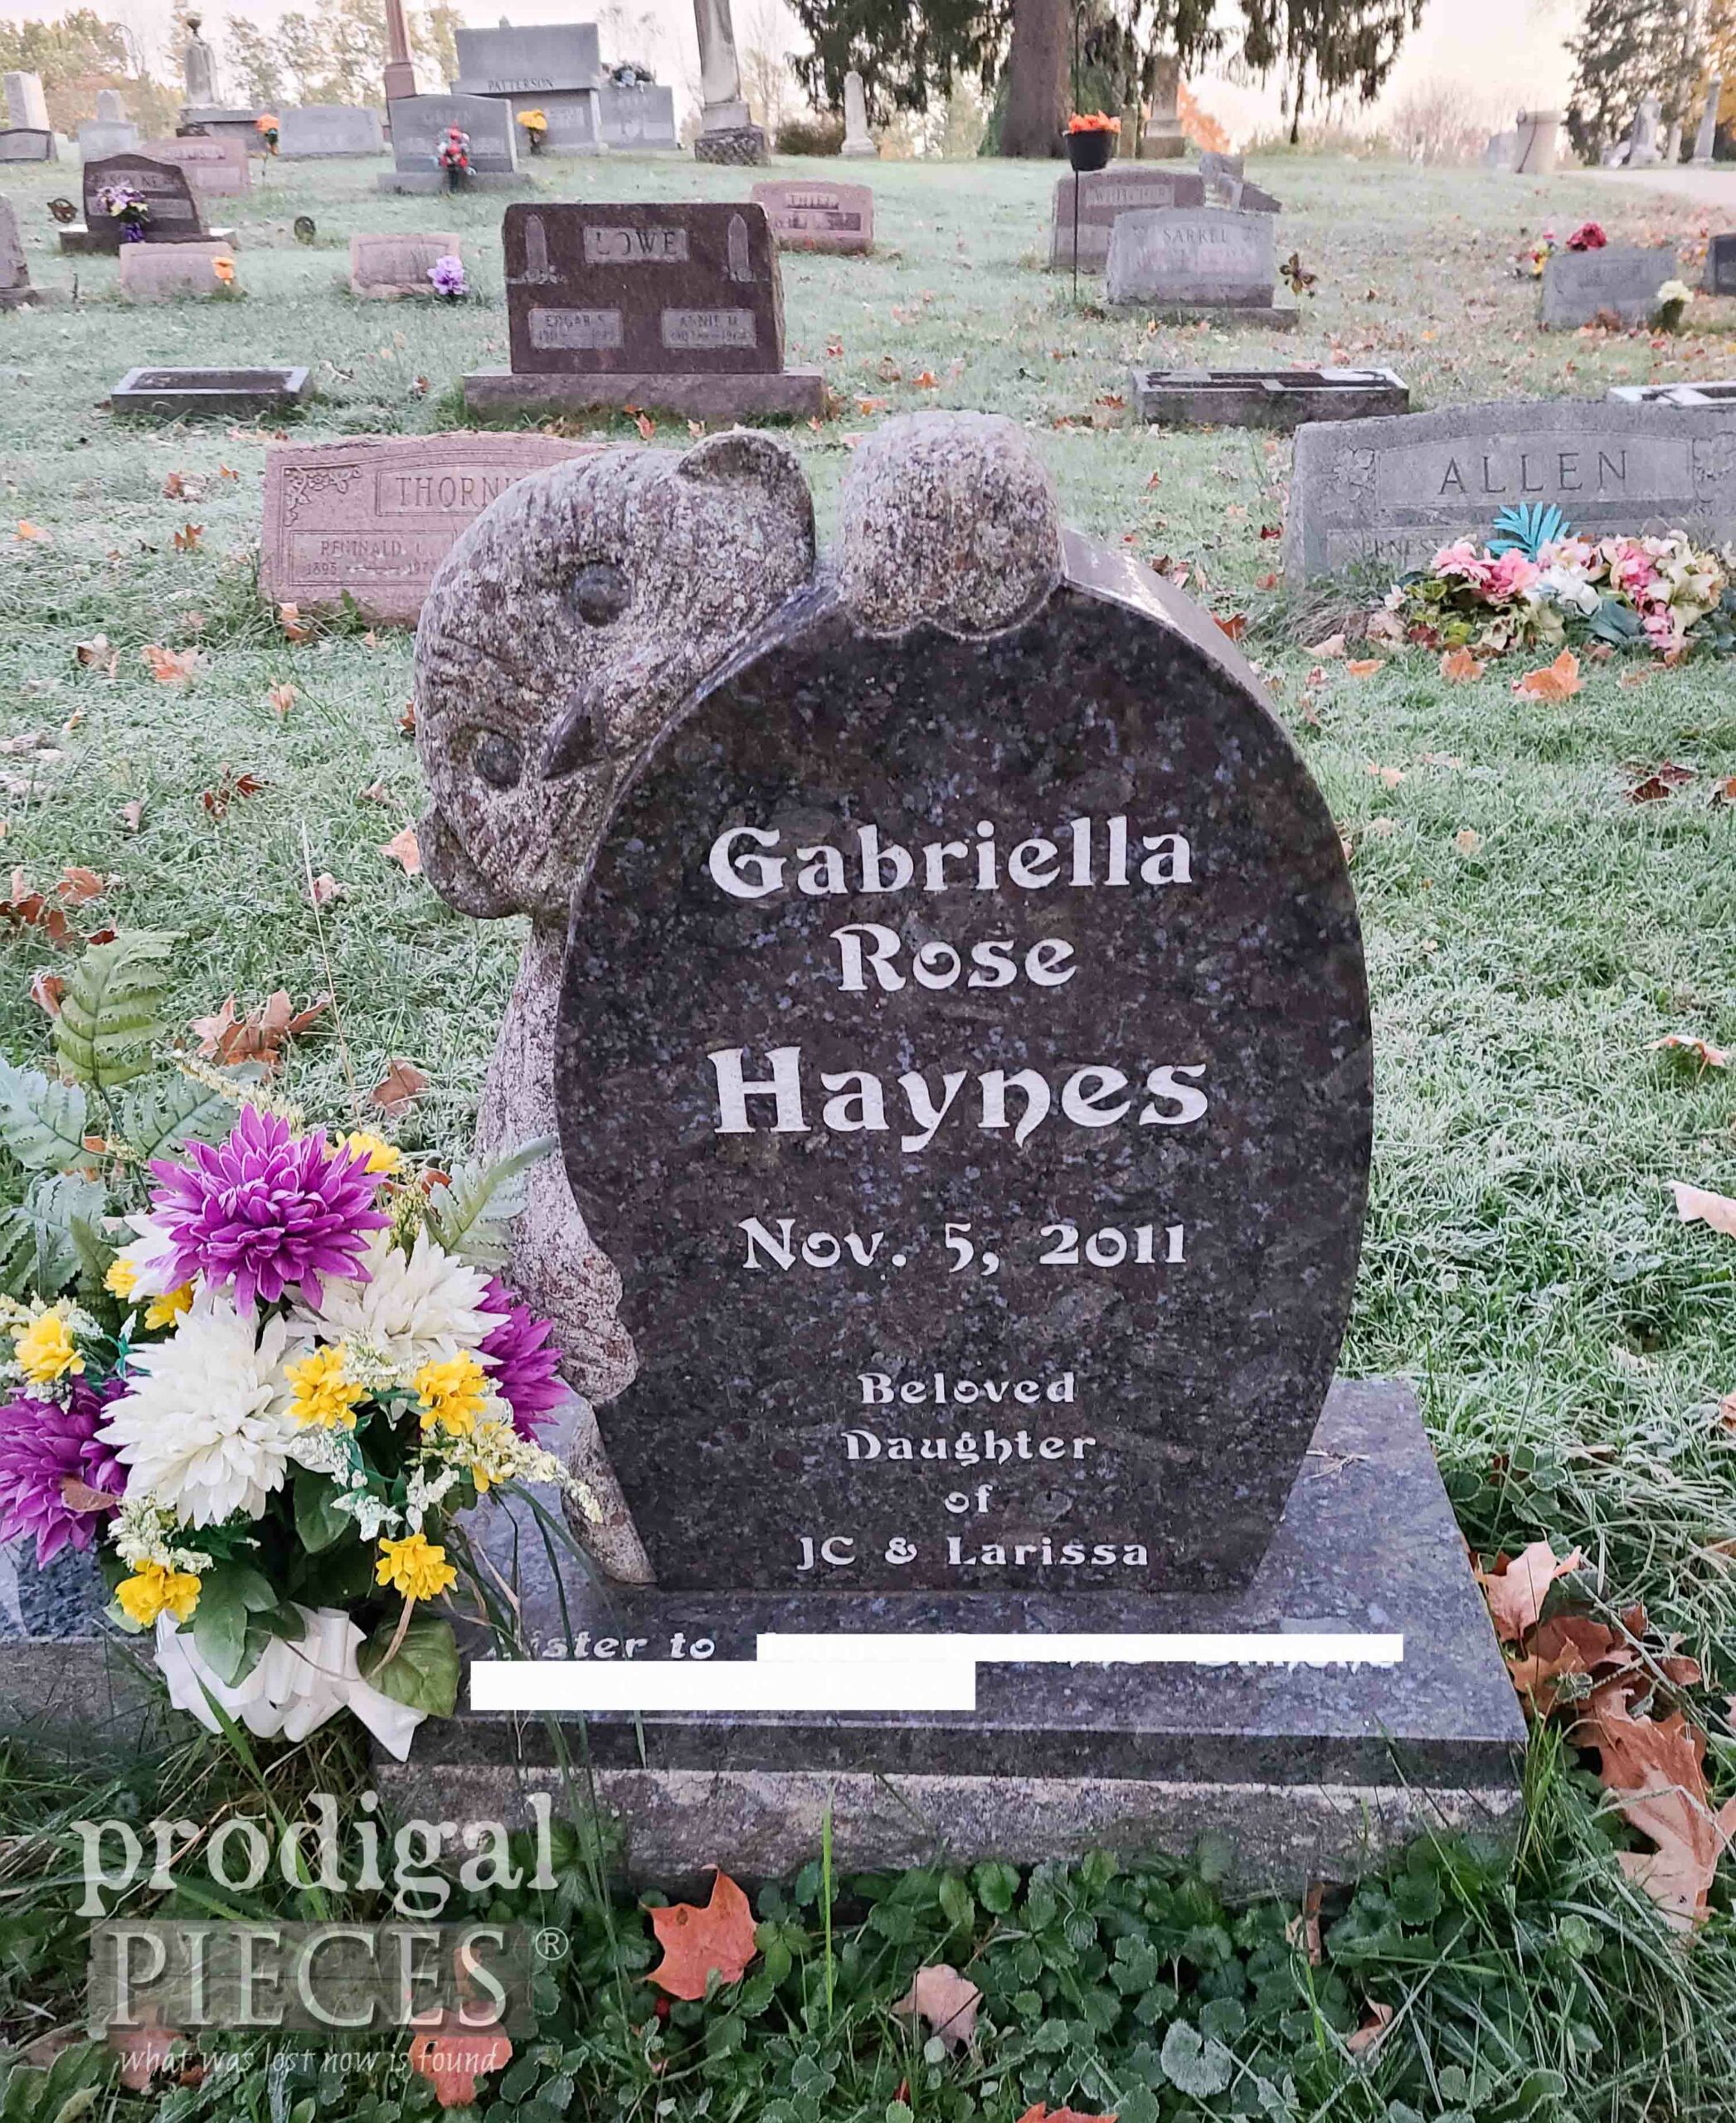 Infant Headstone to Daughter of Larissa of Prodigal Pieces | A Neurotypical Wife Story | prodigalpieces.com #prodigalpieces